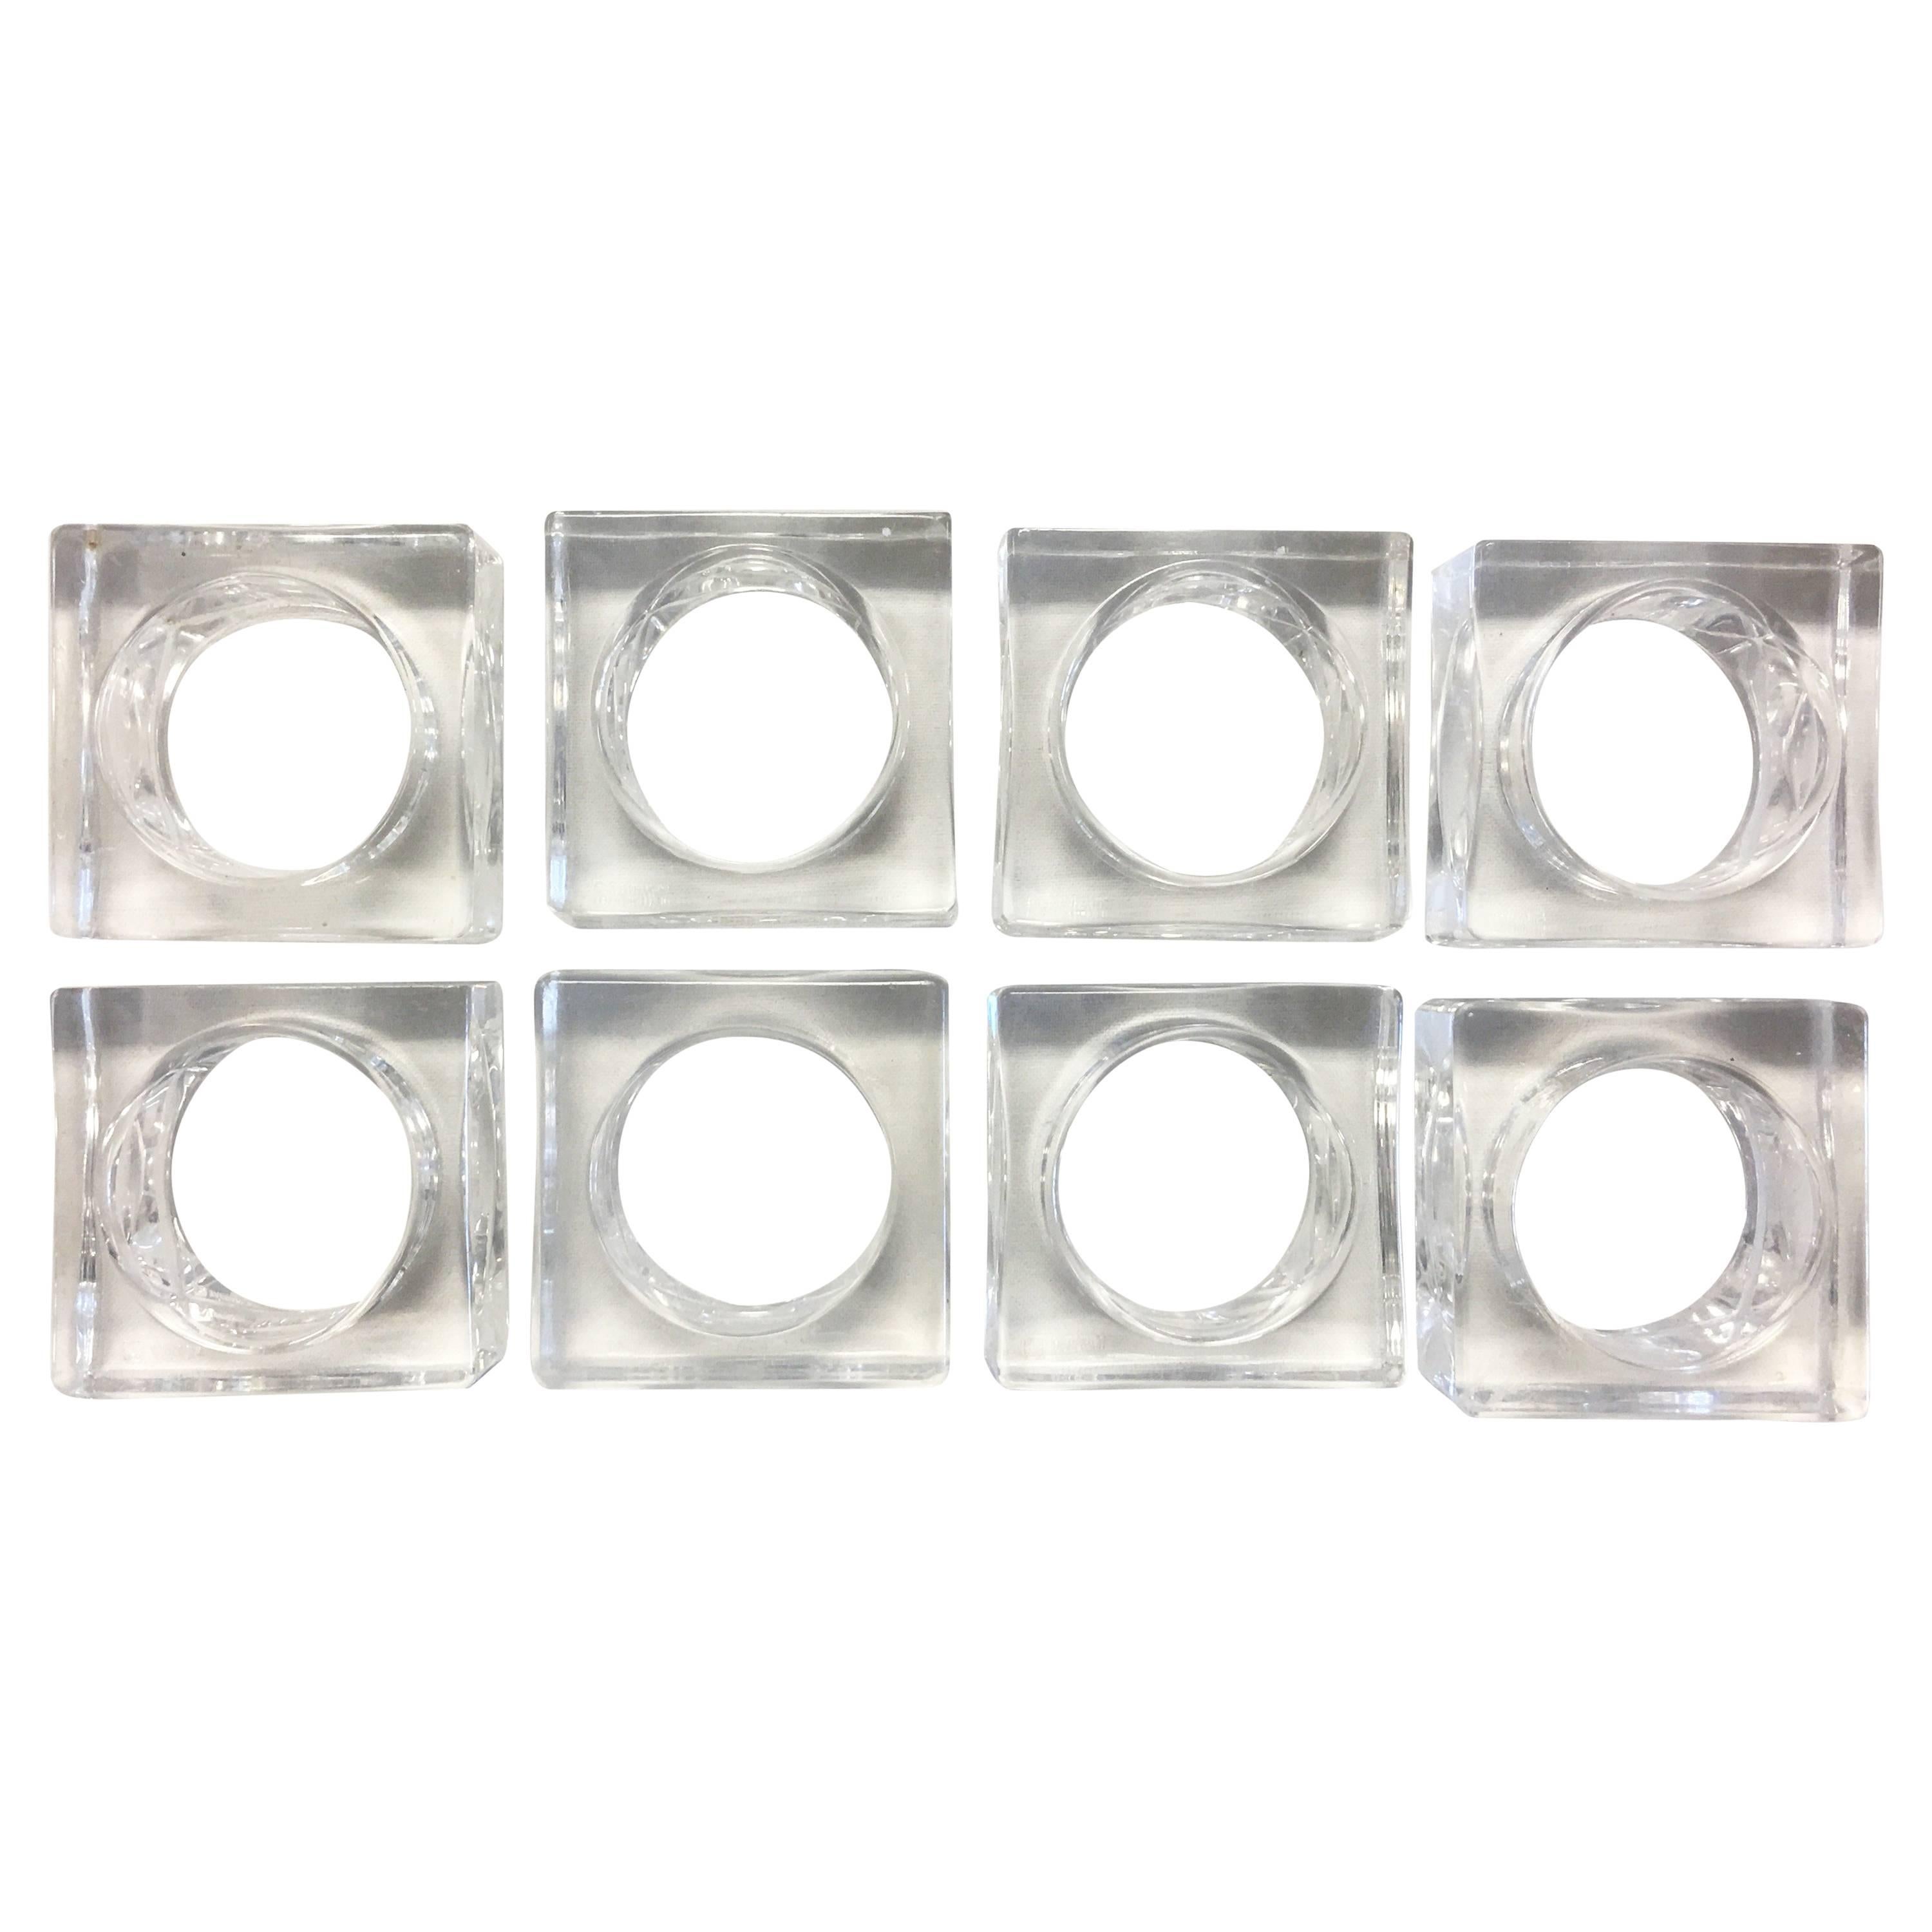 1960s Square Lucite Napkin Rings, Set of Eight